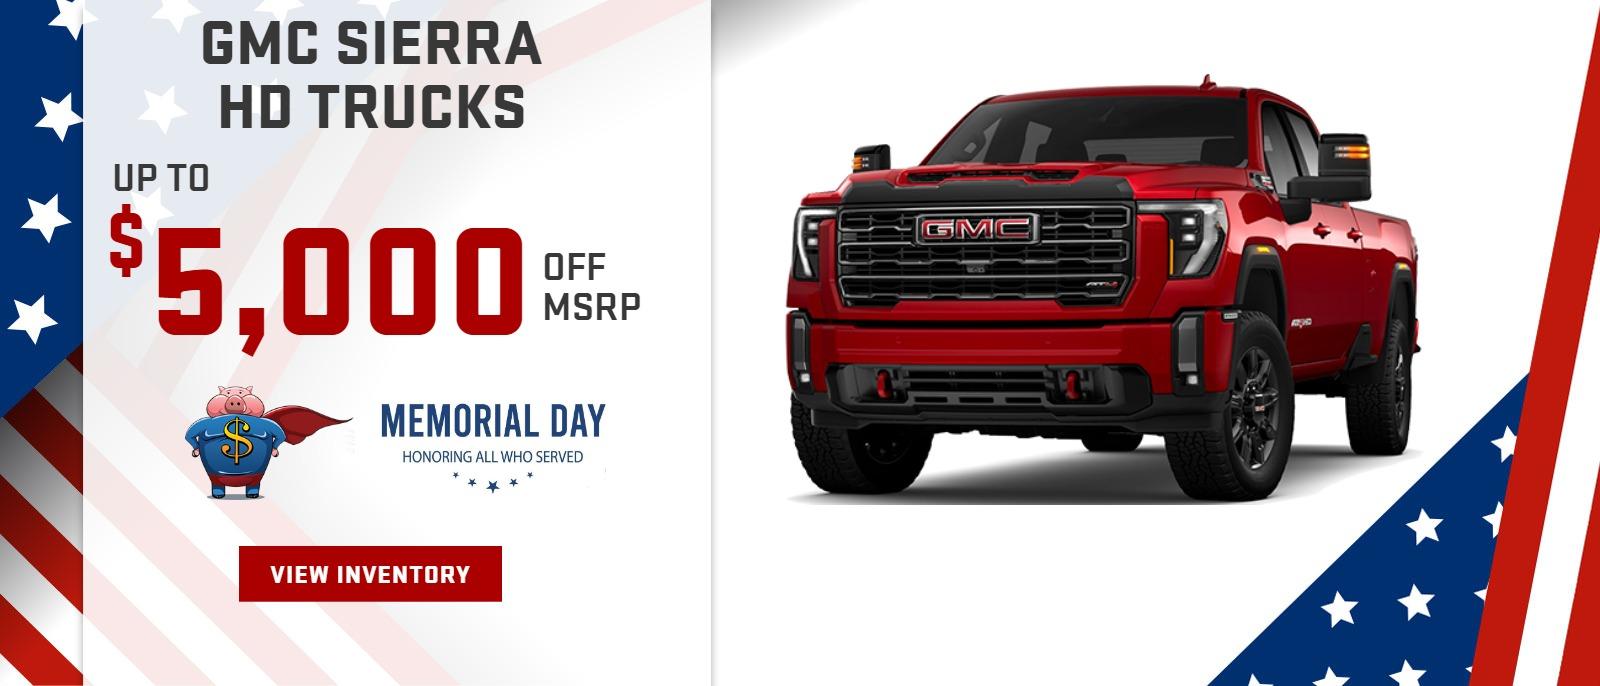 UP TO $5,000 OFF MSRP ON SIERRA 2500HD AND 3500HD TRUCKS AT GLENN POLK CHEVROLET BUICK GMC